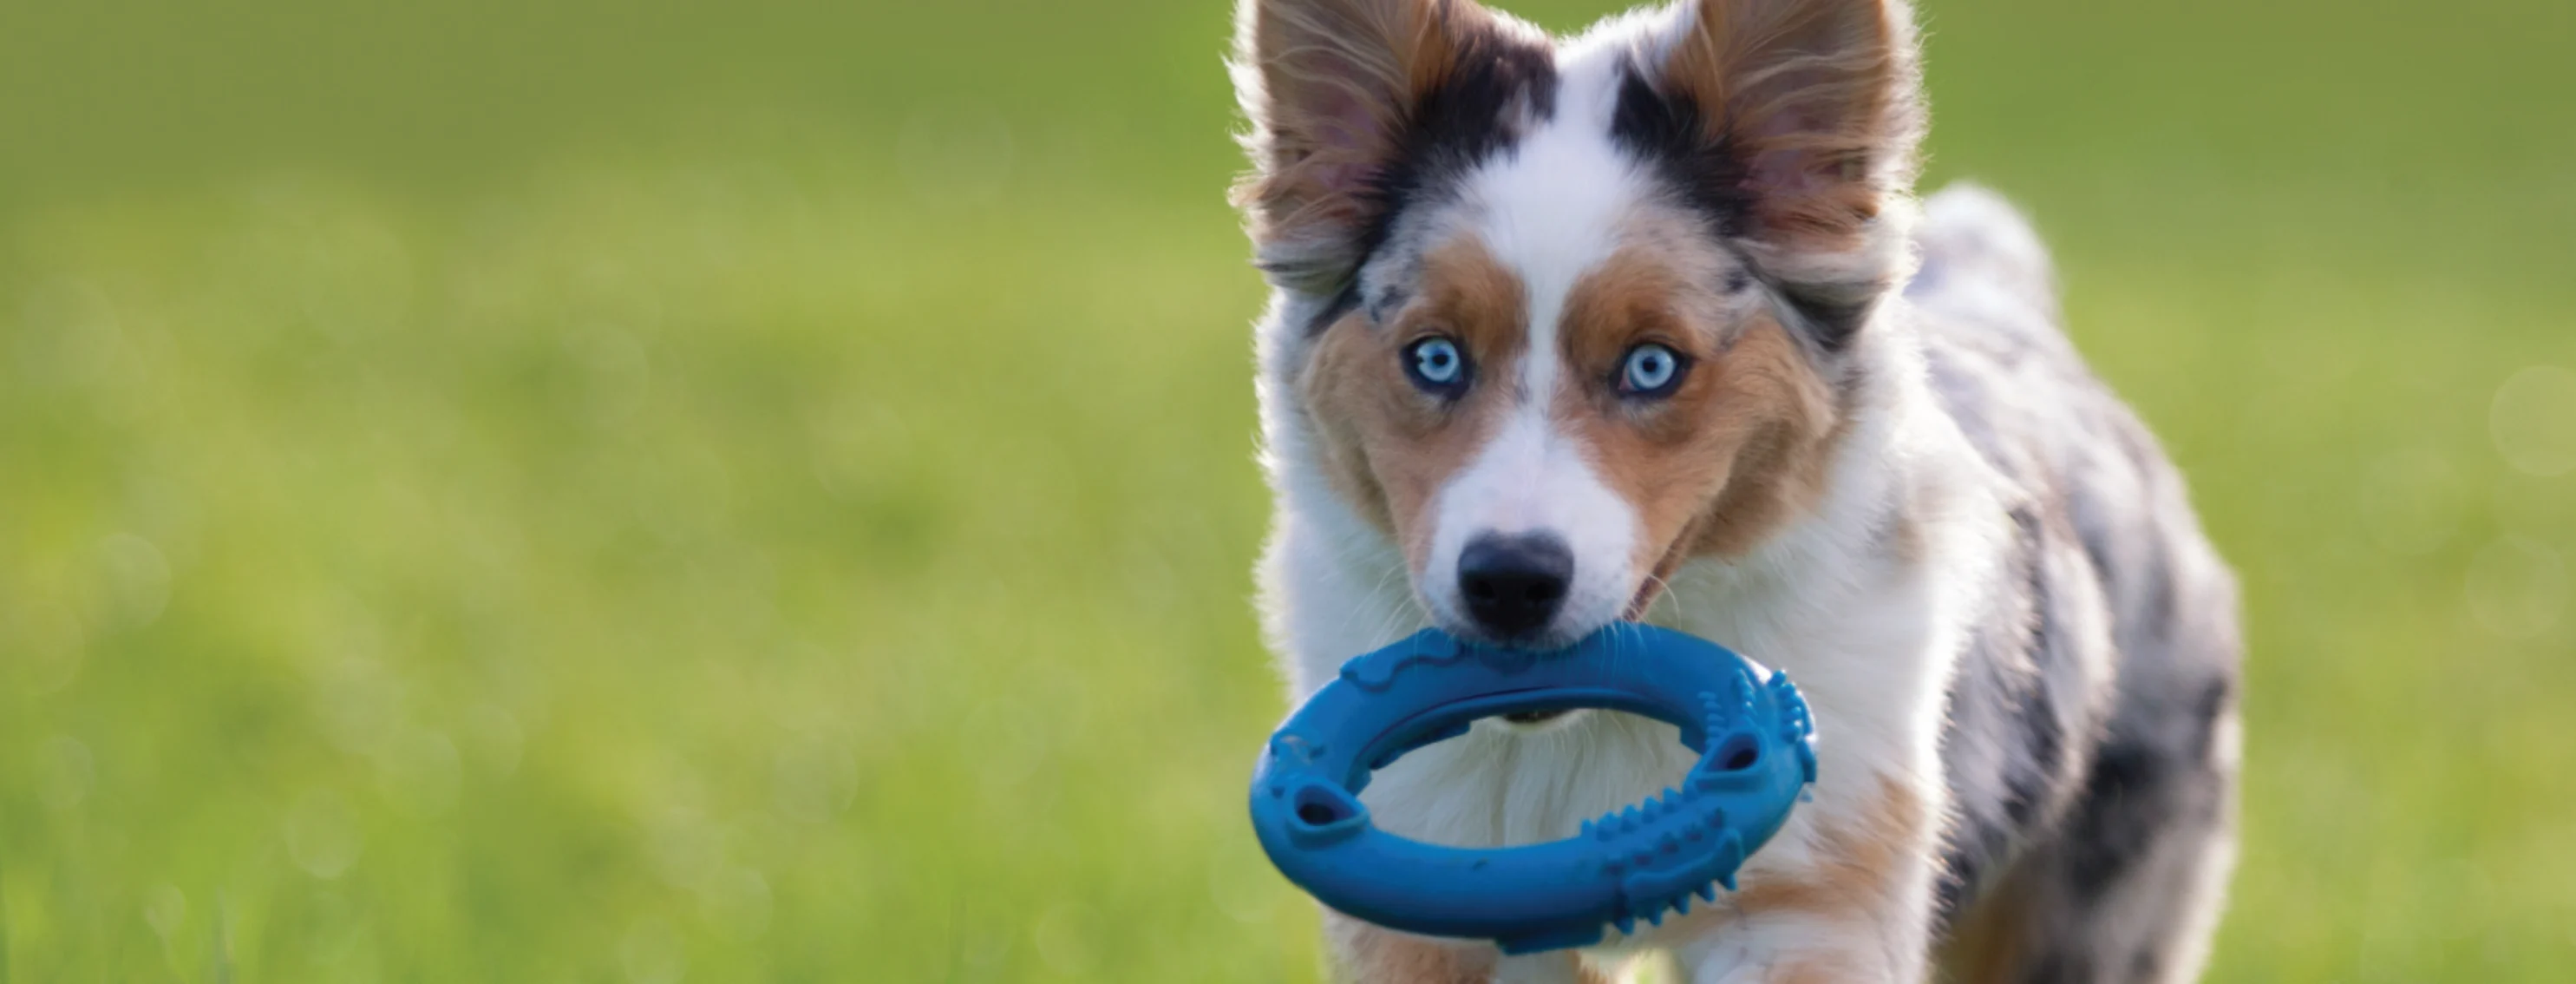 Dog with bright blue eyes and a blue toy in its mouth. 